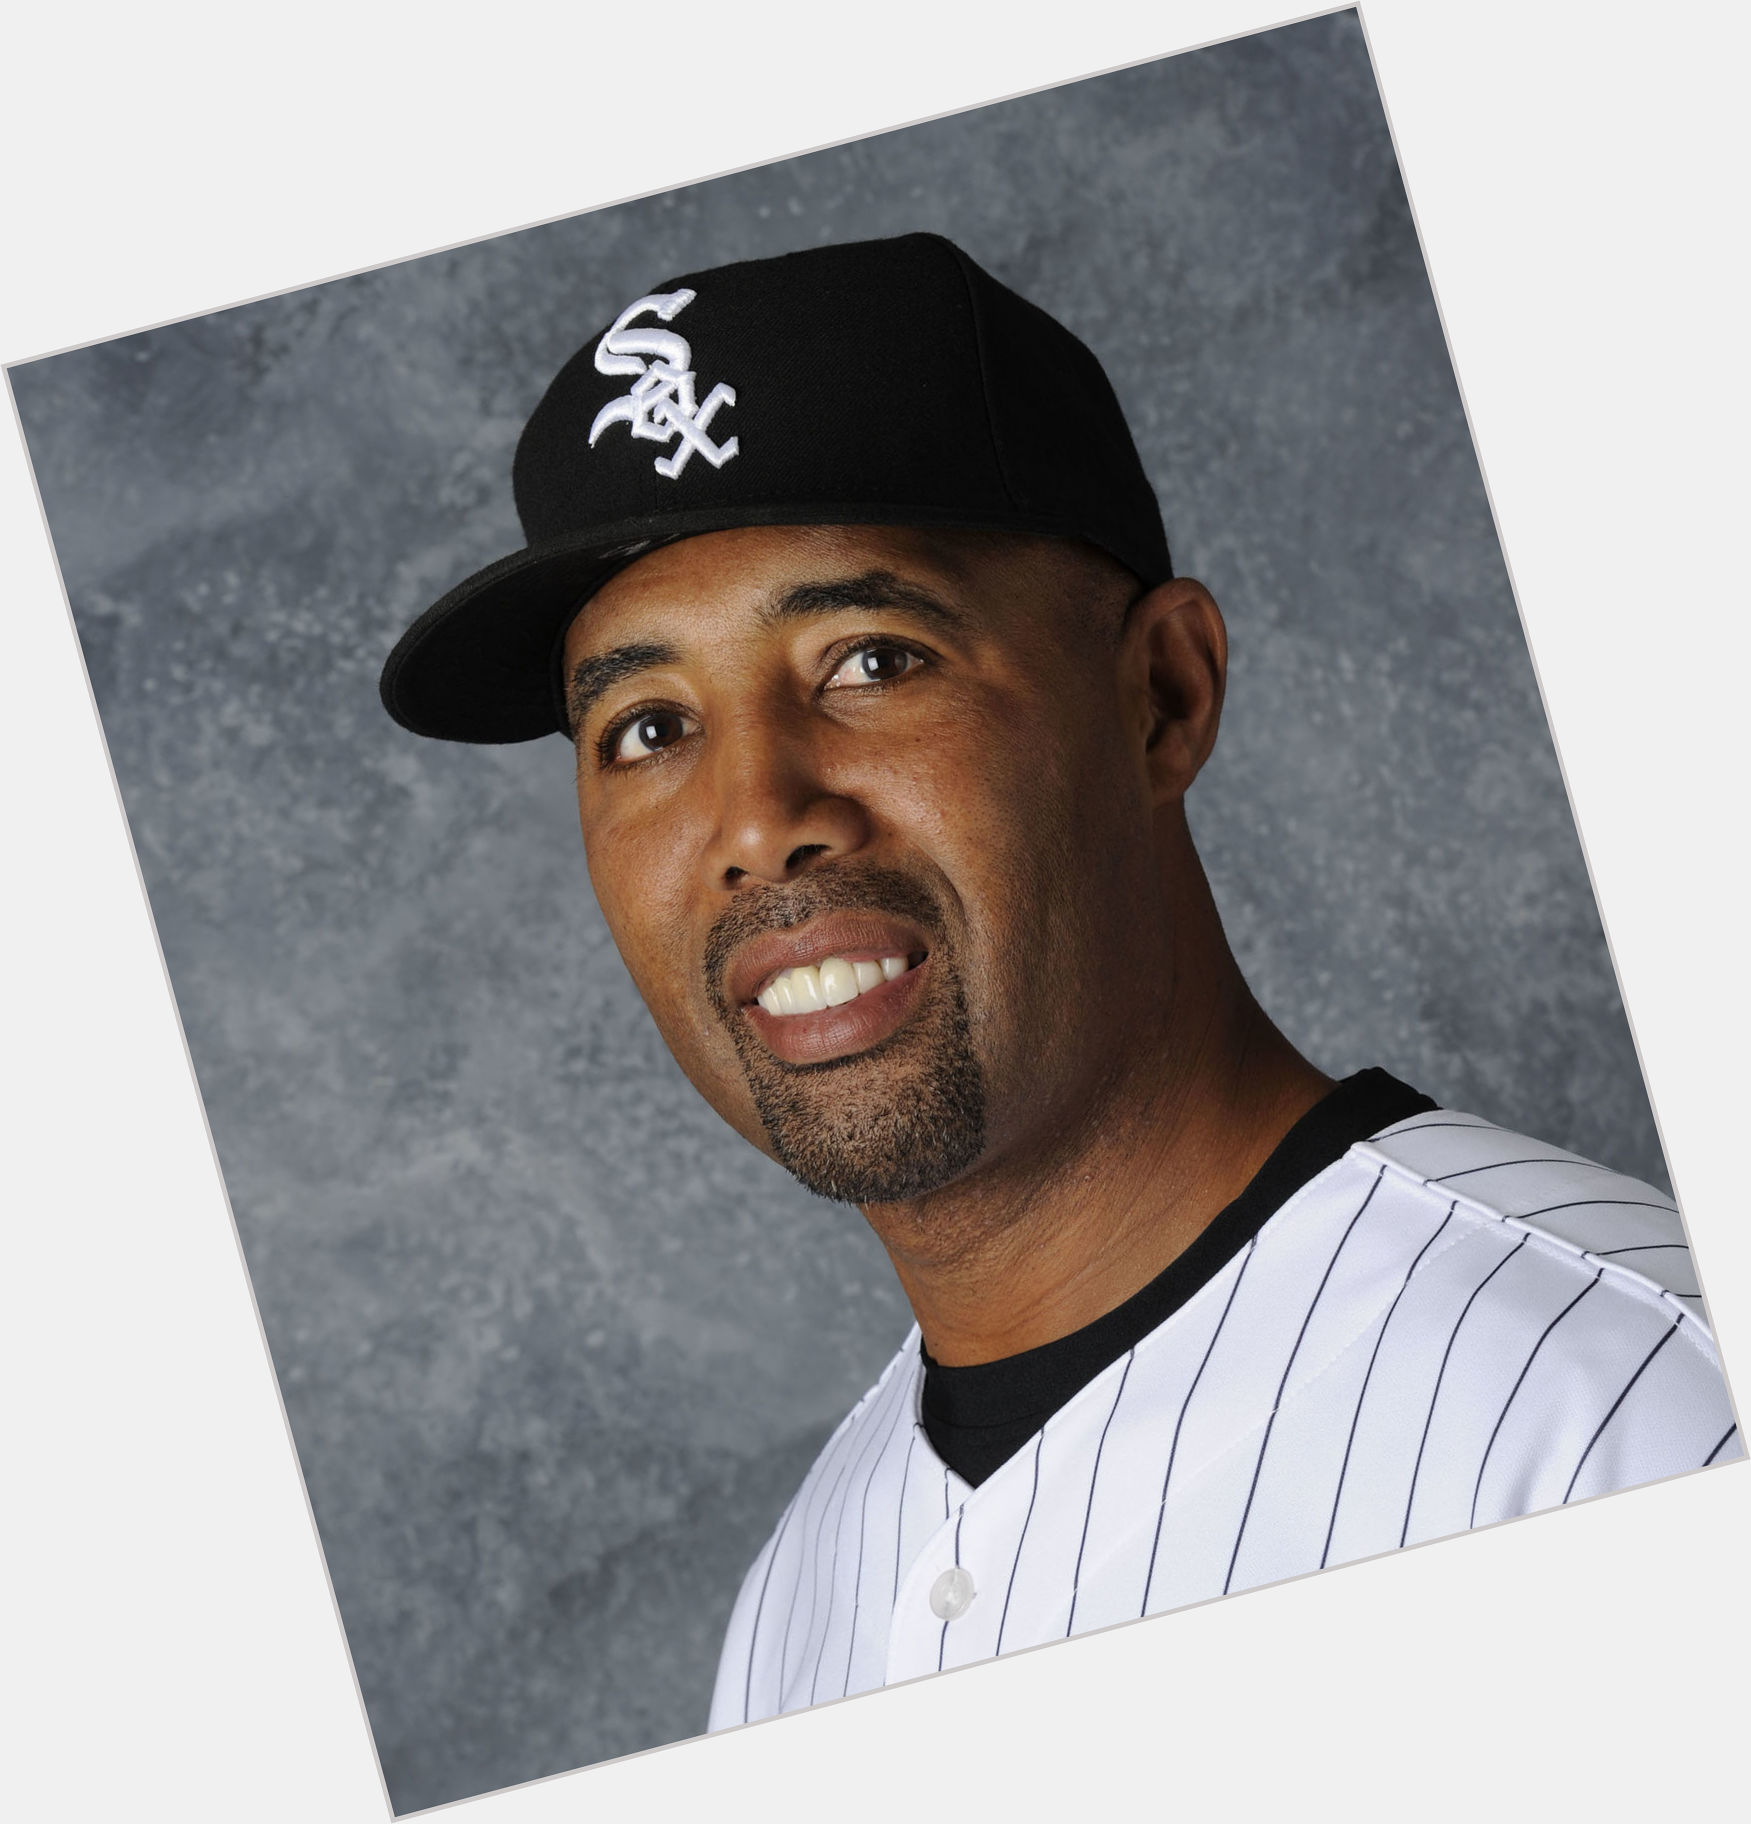 Http://fanpagepress.net/m/H/Harold Baines New Pic 1